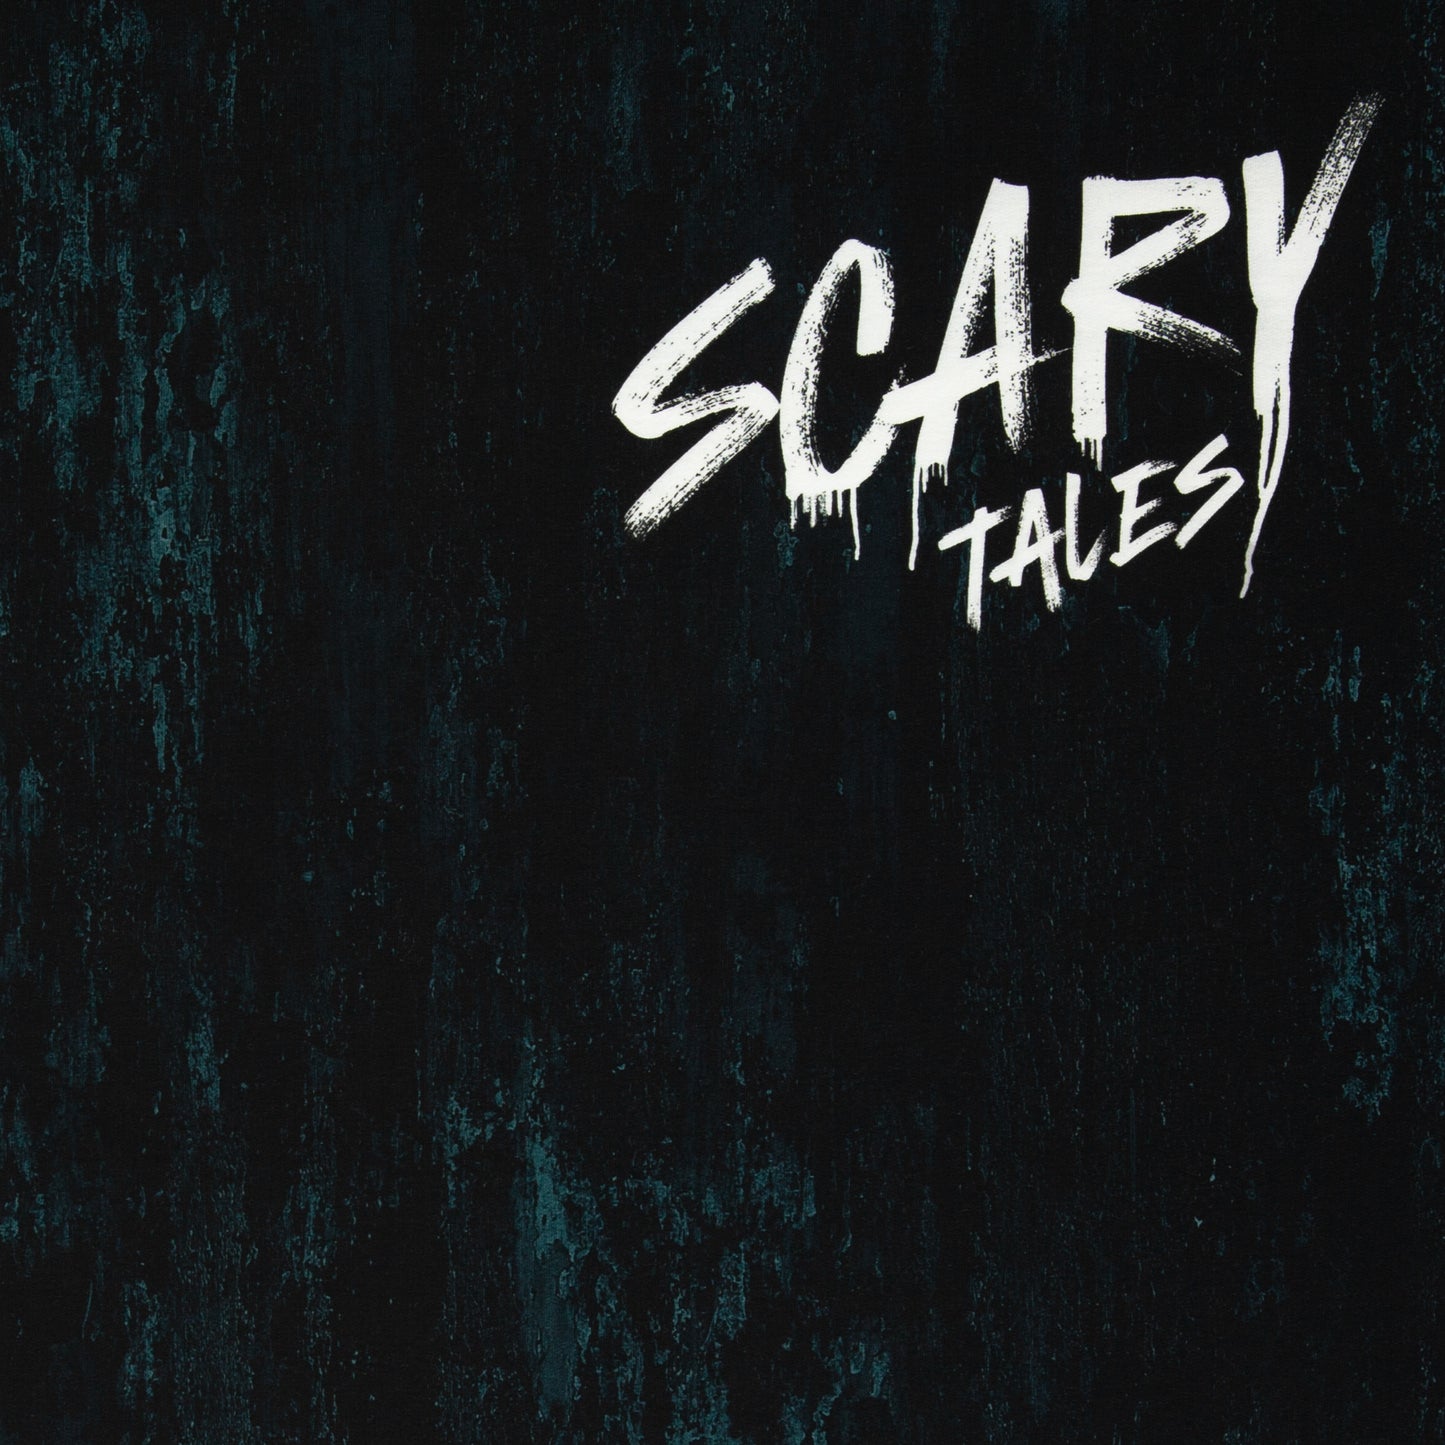 New Euro French Terry Halloween by Thorsten Berger, Scary Tales